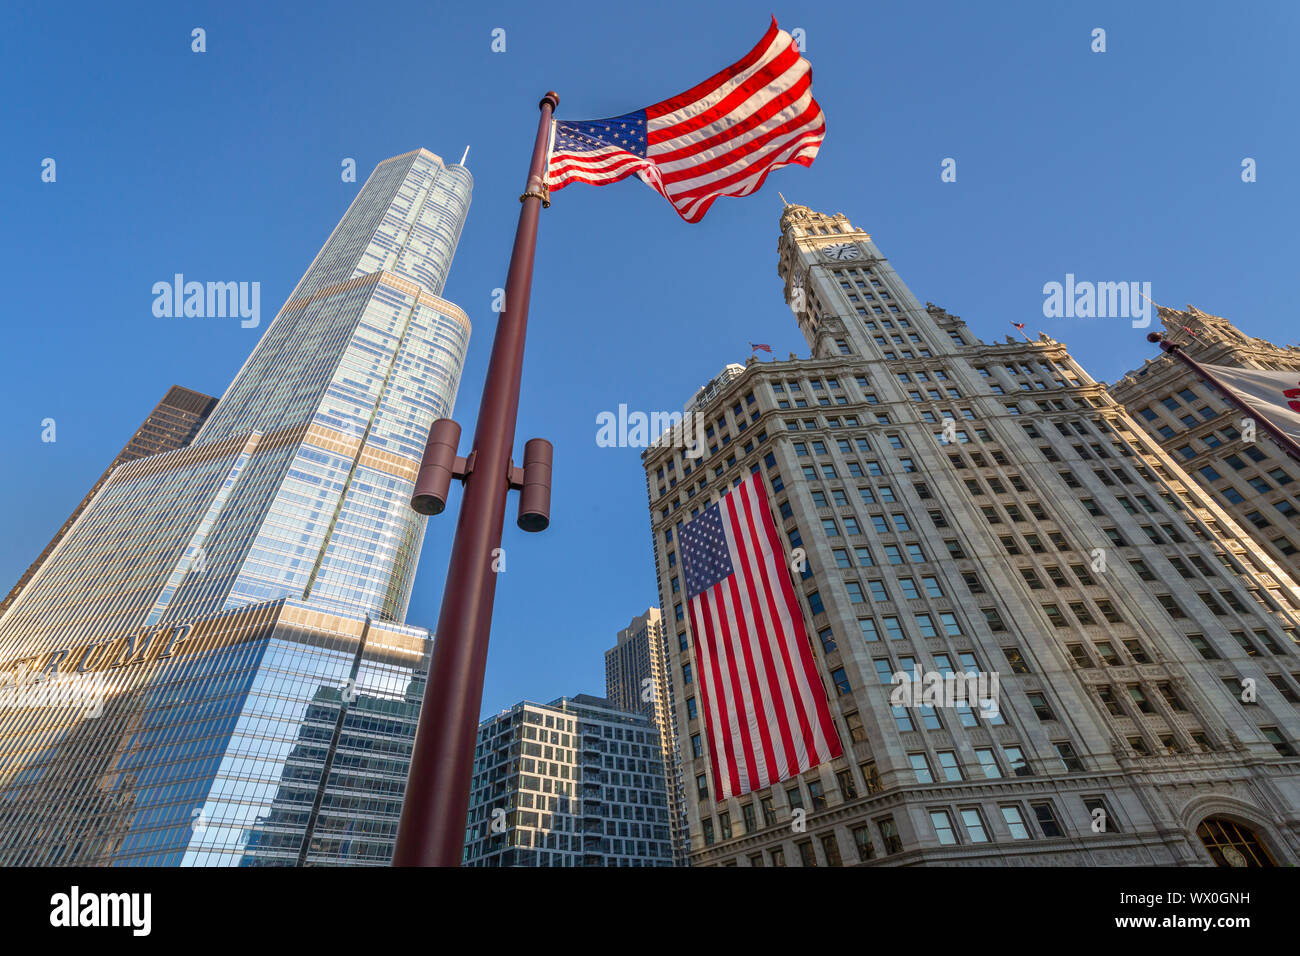 Early morning view of The Wrigley Building and Stars and Stripes US flag on DuSable Bridge, Chicago, Illinois, United States of America, North America Stock Photo